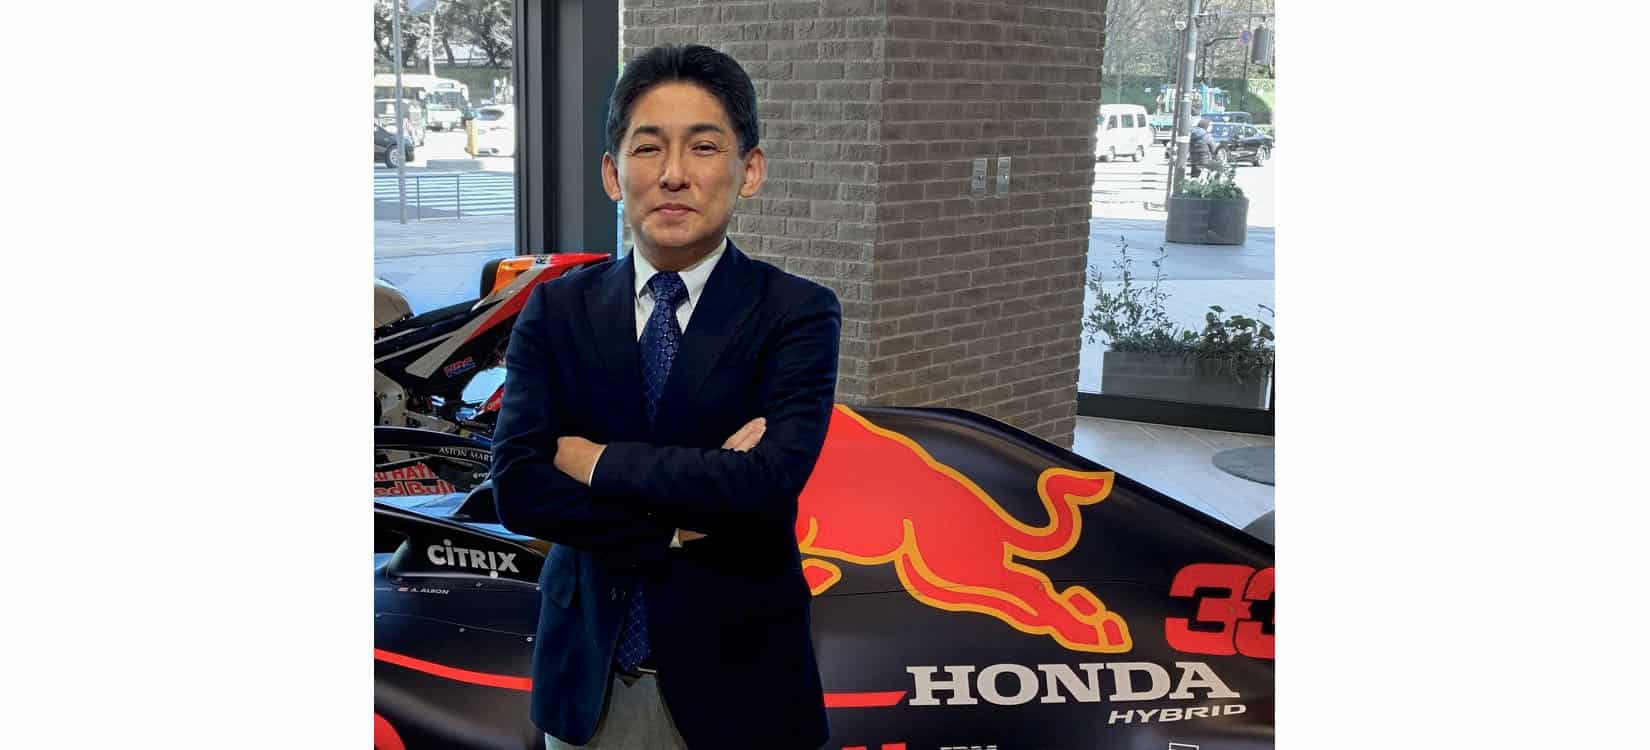 Honda Cars Philippines Honda Cars Philippines Inc Welcomes Its New President